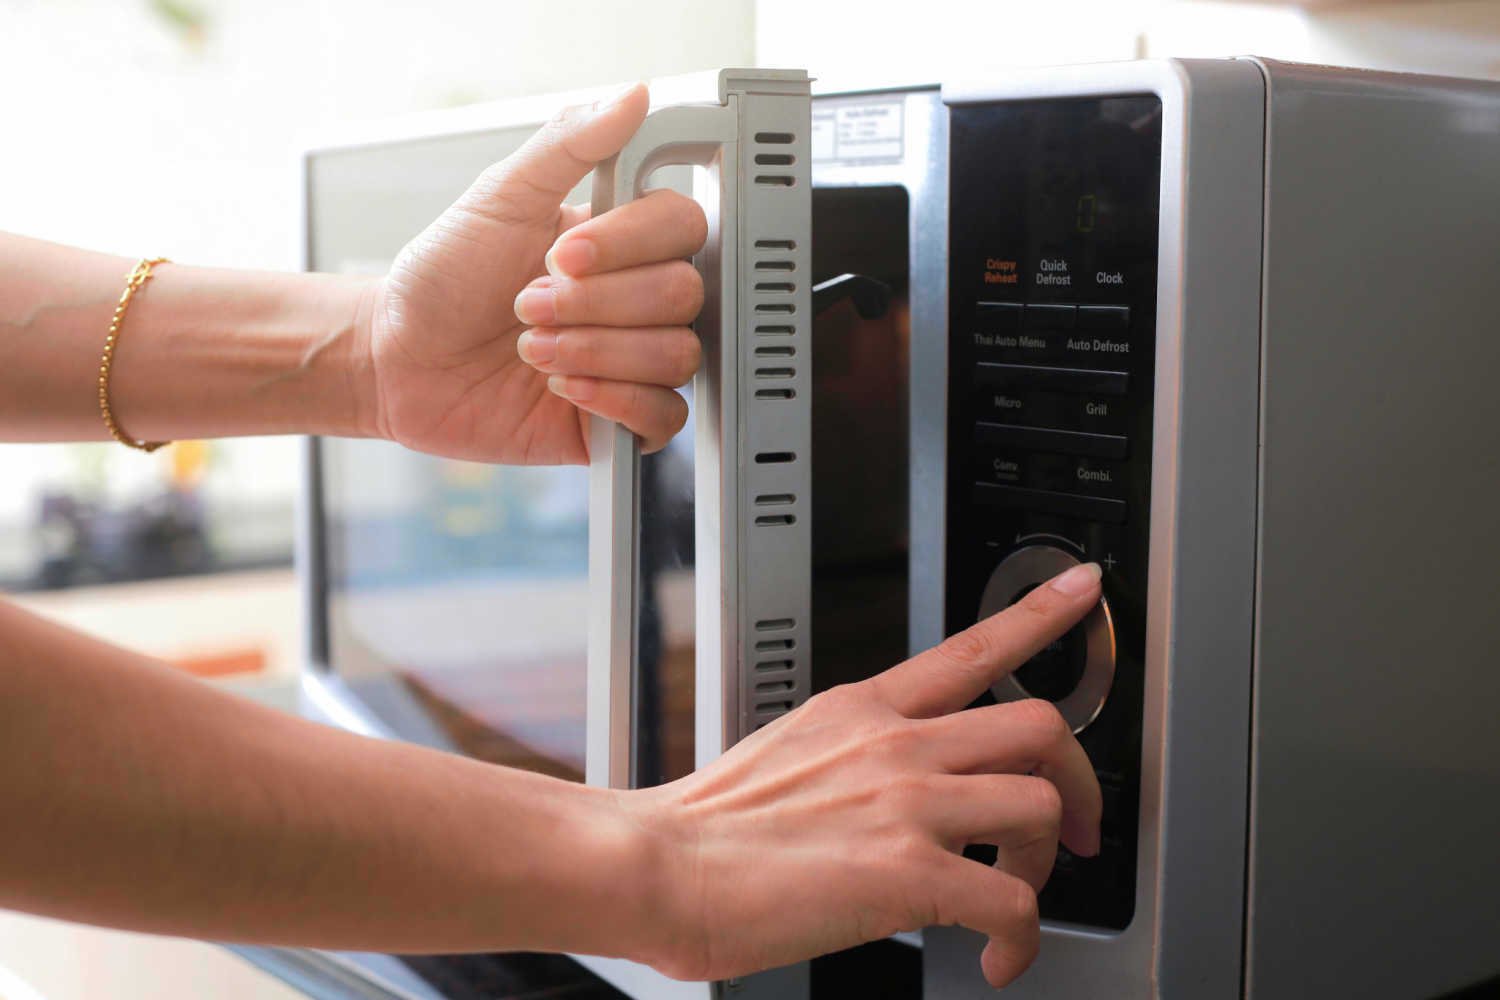 Tips For Reheating in a Microwave